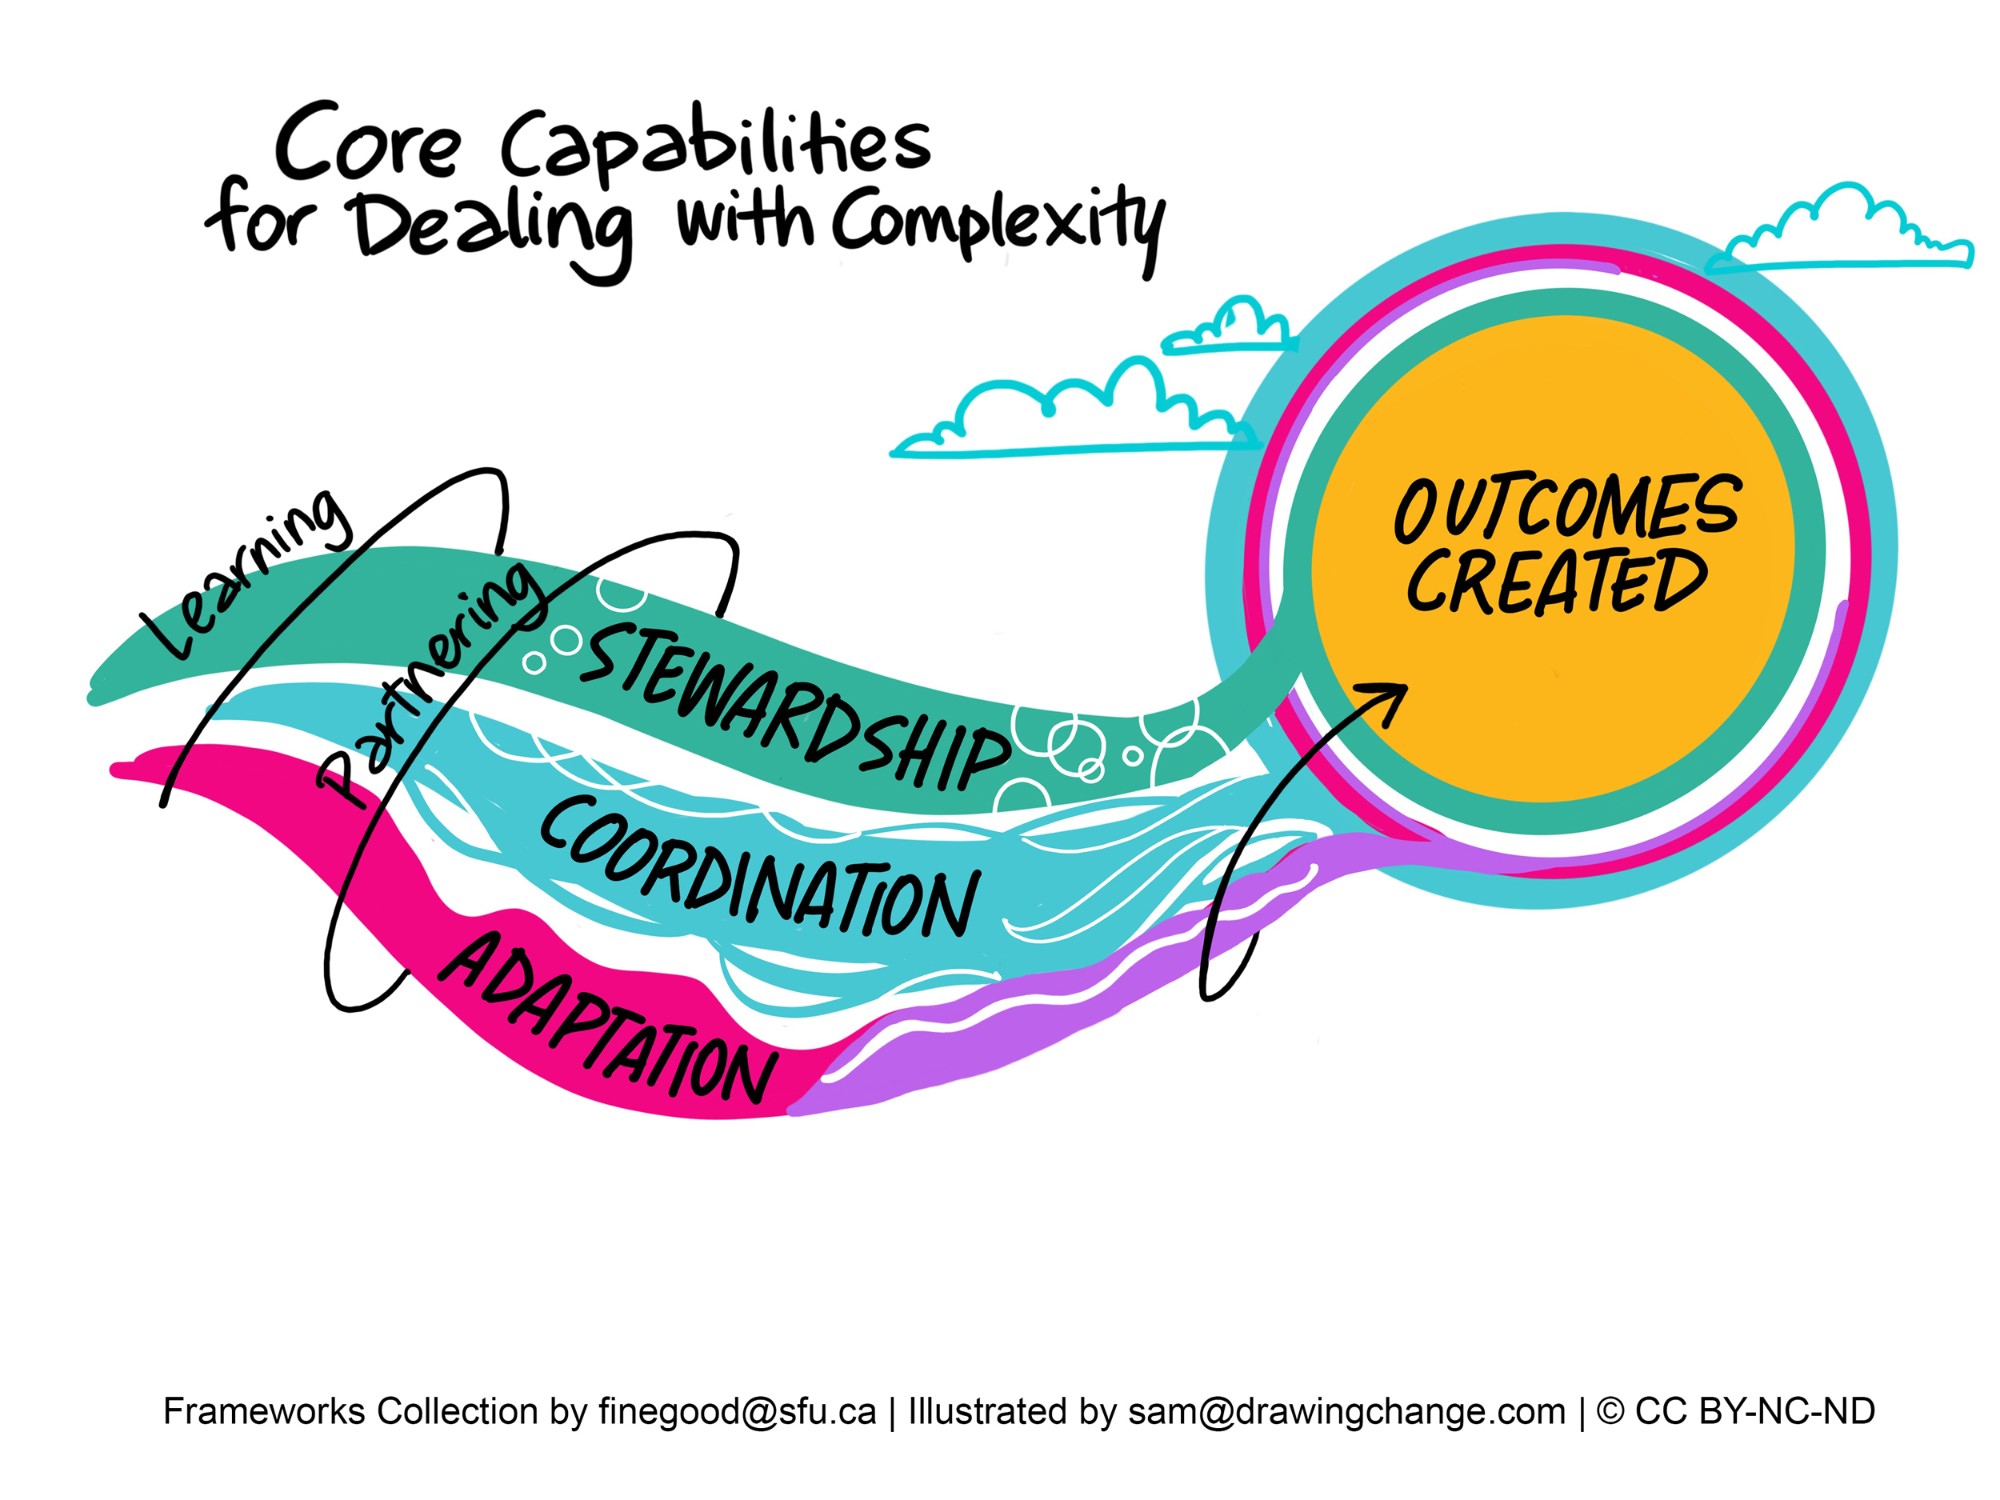 The image is a vibrant, conceptual illustration titled "Core Capabilities for Dealing with Complexity." It's designed to represent a wave or flow of elements leading to an outcome. The wave is segmented into colorful layers, each labeled with a key capability:  "Stewardship" is in green. "Coordination" is indicated on a teal wave. "Adaptation" is the bottom layer which starts in teal and shifts to purple. "Learning" and "Partnering" spiral around the waves.  The waves lead into a bright yellow circle labeled "OUTCOMES CREATED." It indicates that when these capabilities are applied in a coordinated manner, they lead to the creation of positive outcomes.  Clouds are sketched in the background, suggesting a high-level or overarching perspective.   The image is from the Frameworks Collection by finegood@sfu.ca and illustrated by sam@drawingchange.com, with a Creative Commons license: CC BY-NC-ND. 